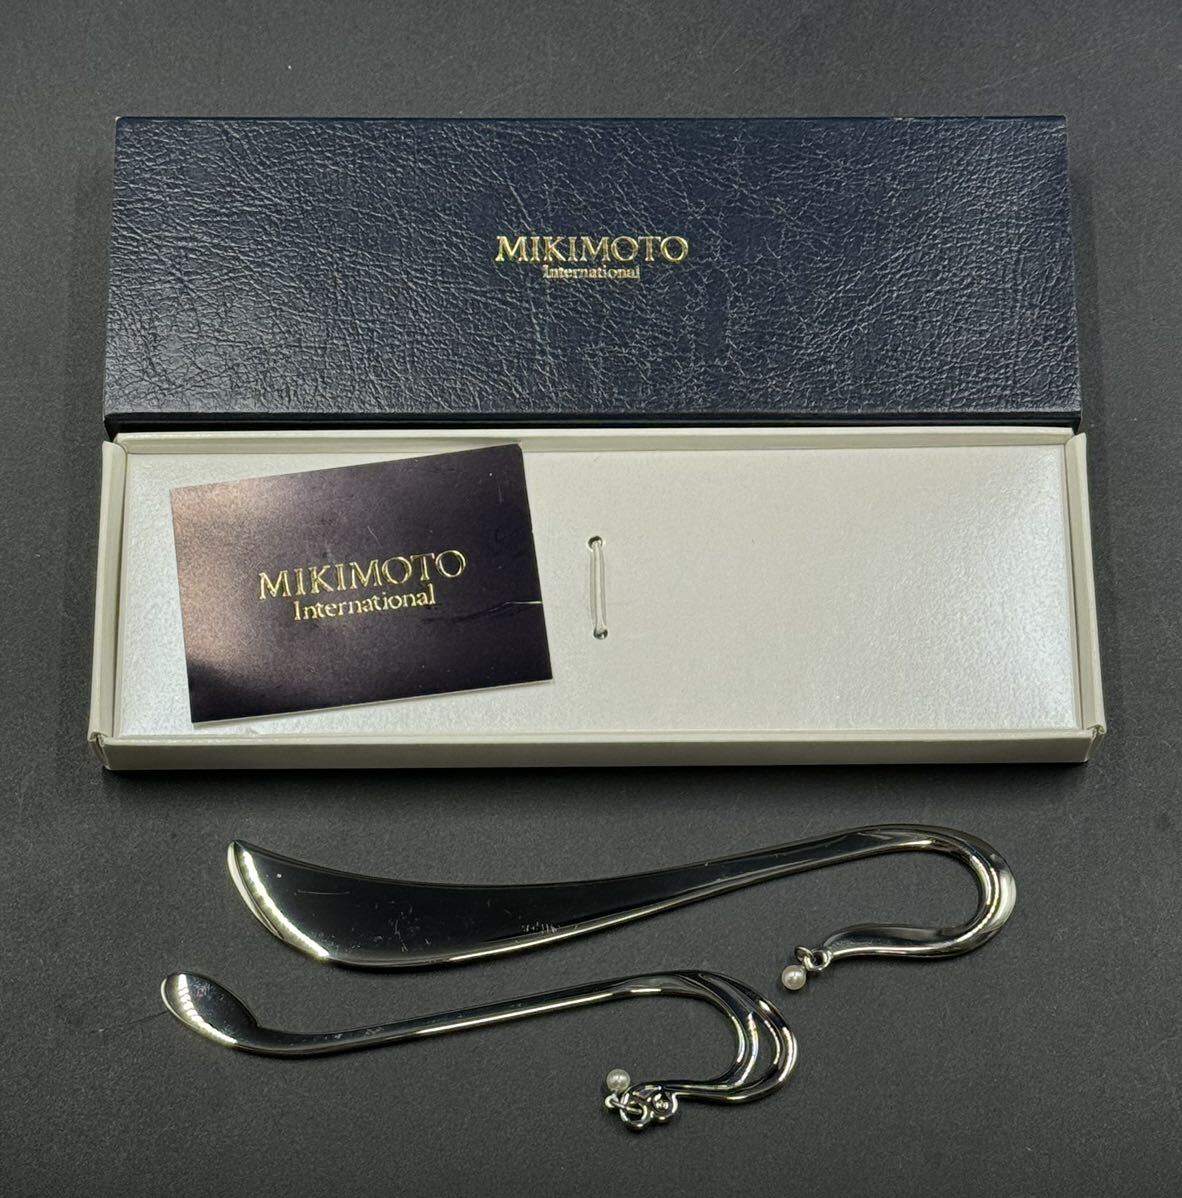 MIKIMOTO Mikimoto book marker magnifier compact mirror other 